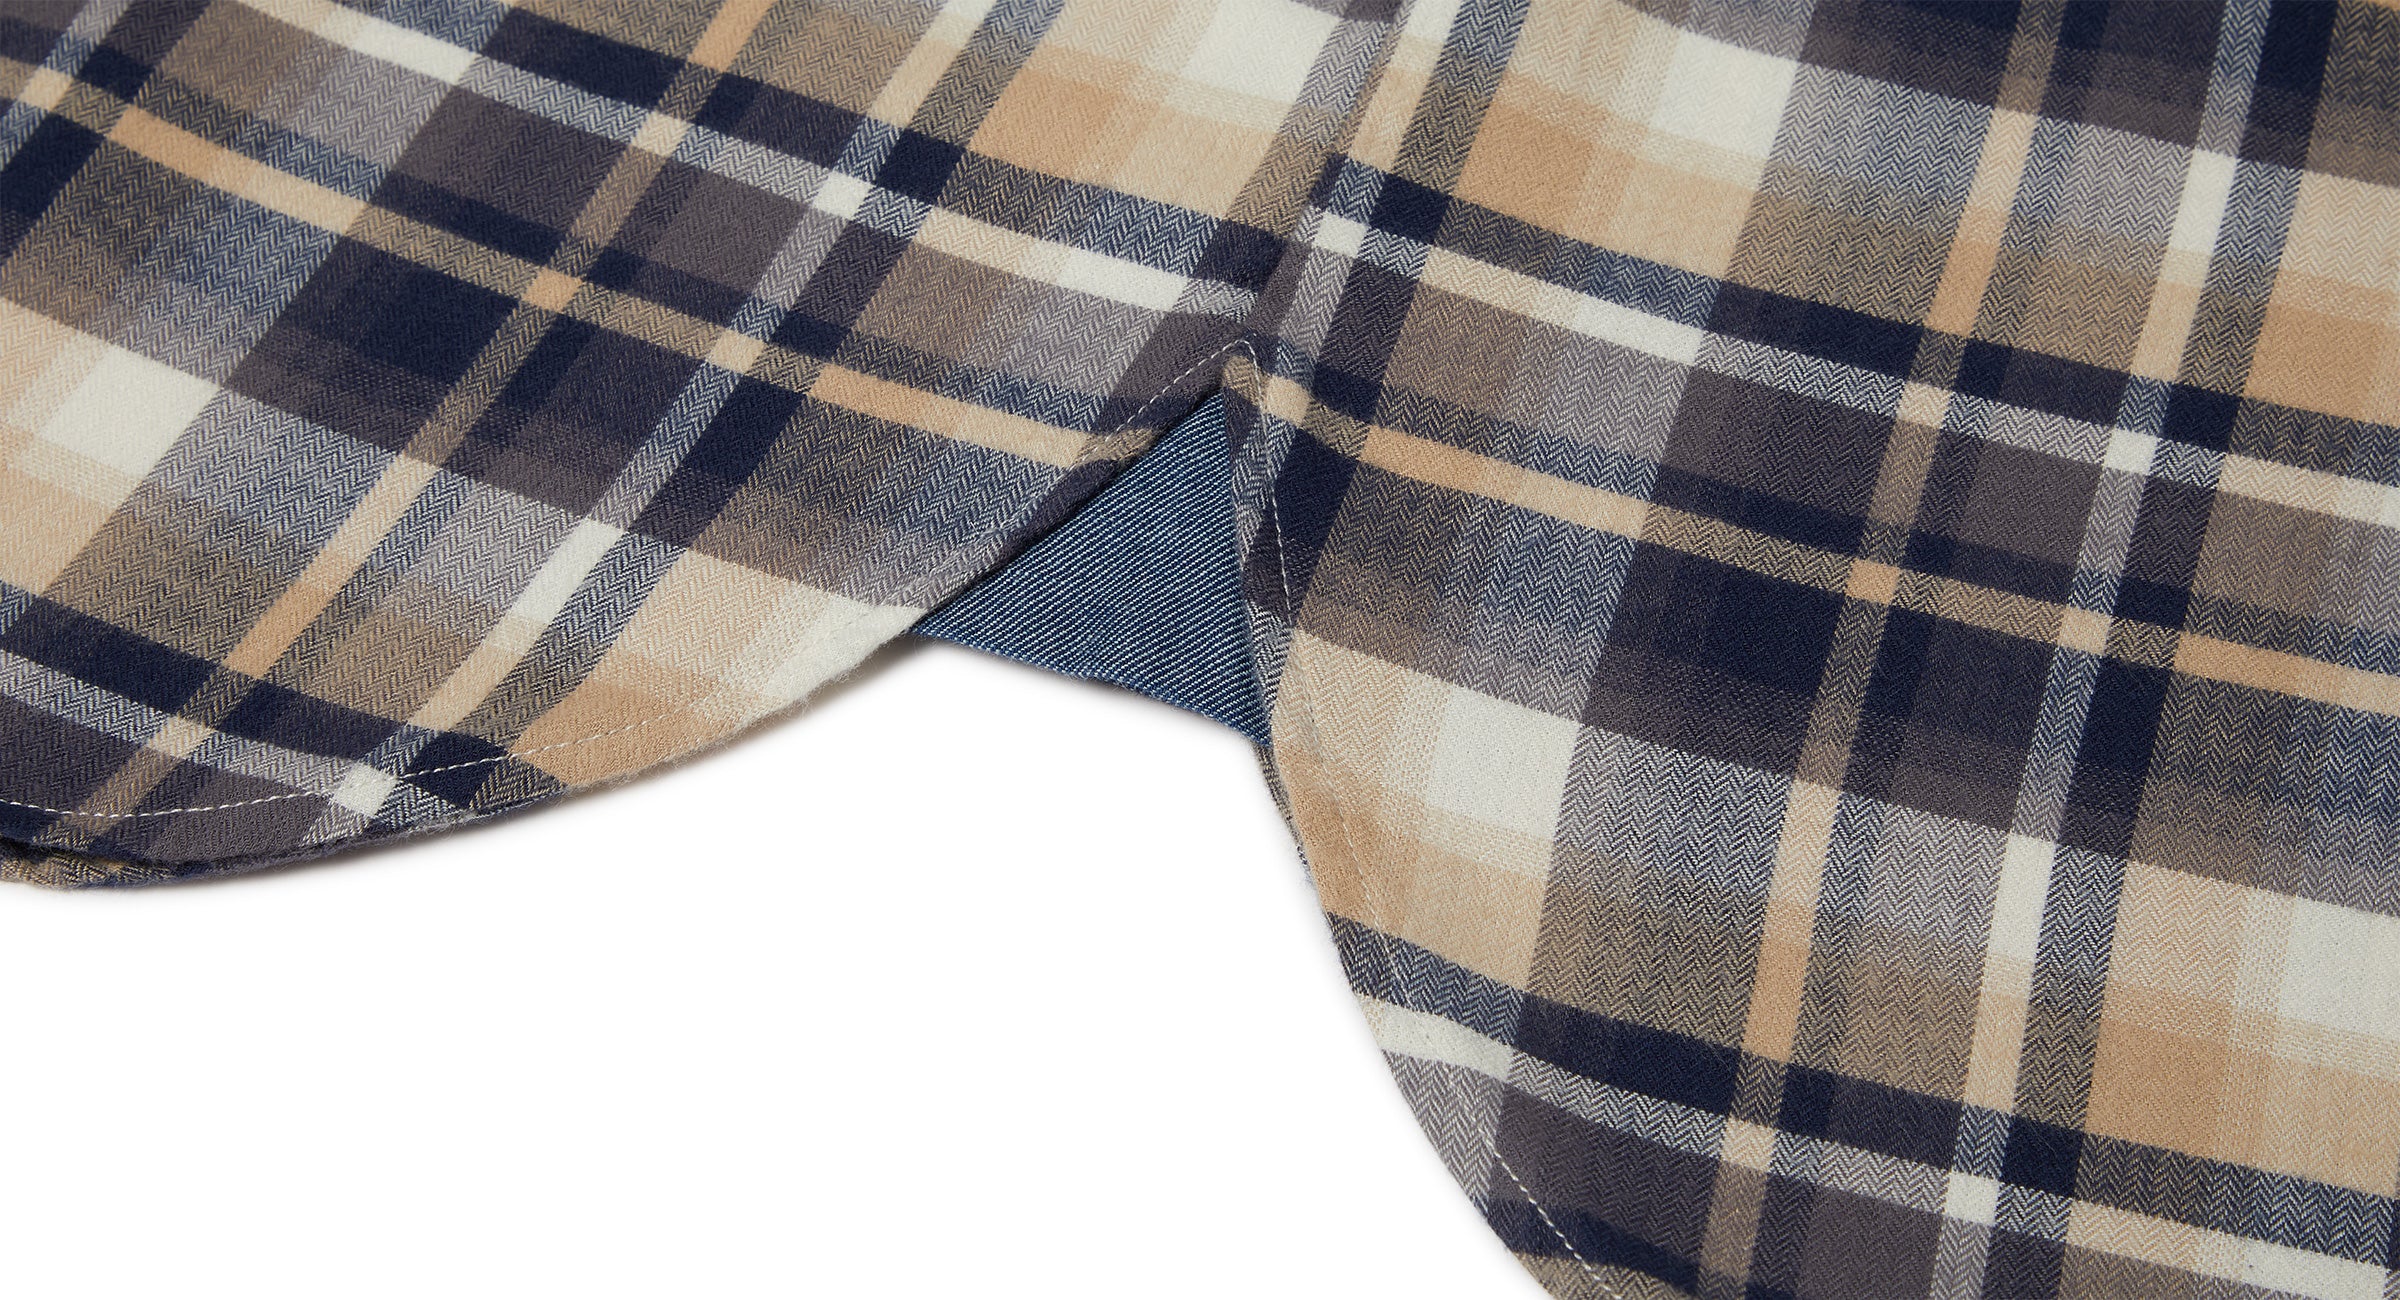 Censo Navy/Beige Check